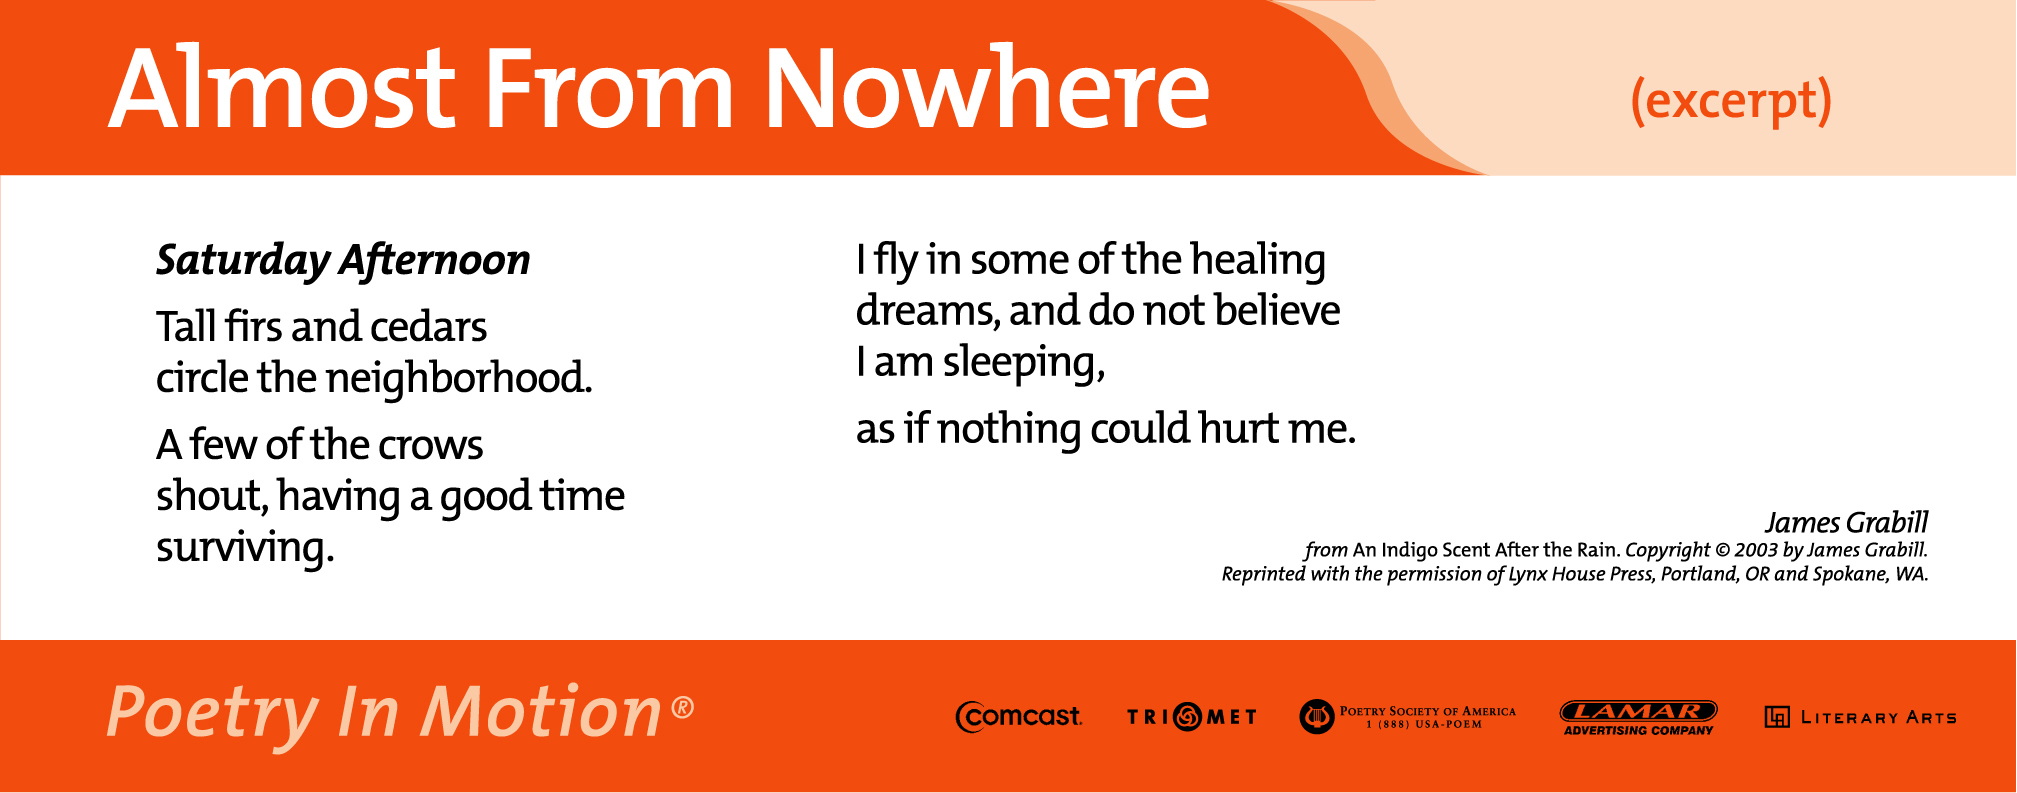 A white poster features an excerpt from the poem Almost From Nowhere by James Grabill. The poster is bordered by orange on the top and bottom.